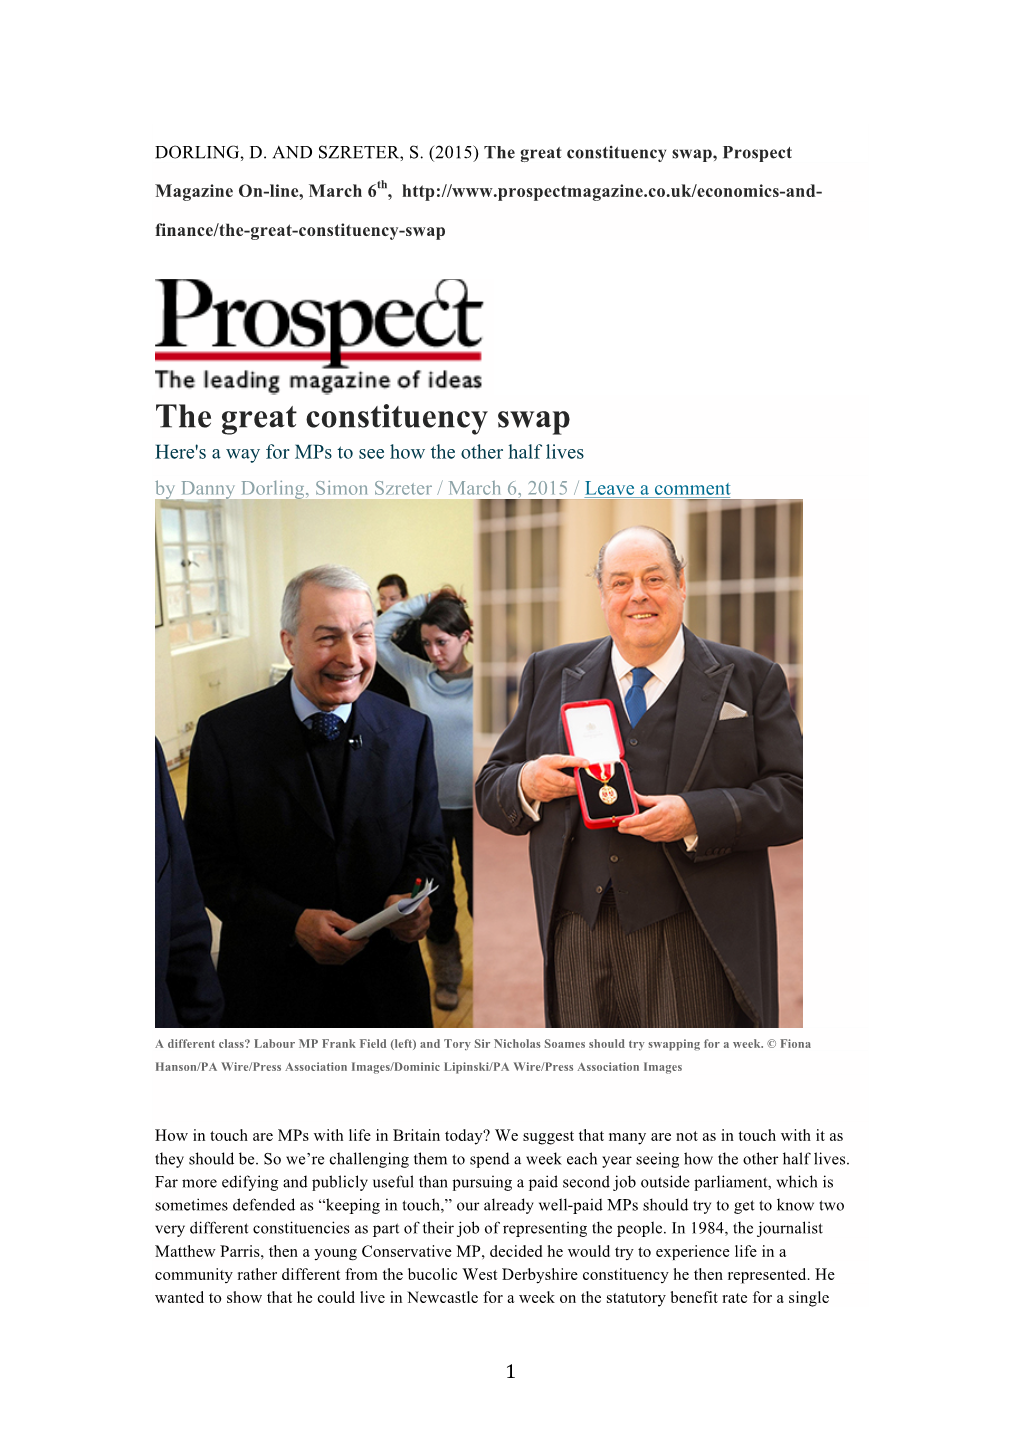 The Great Constituency Swap, Prospect